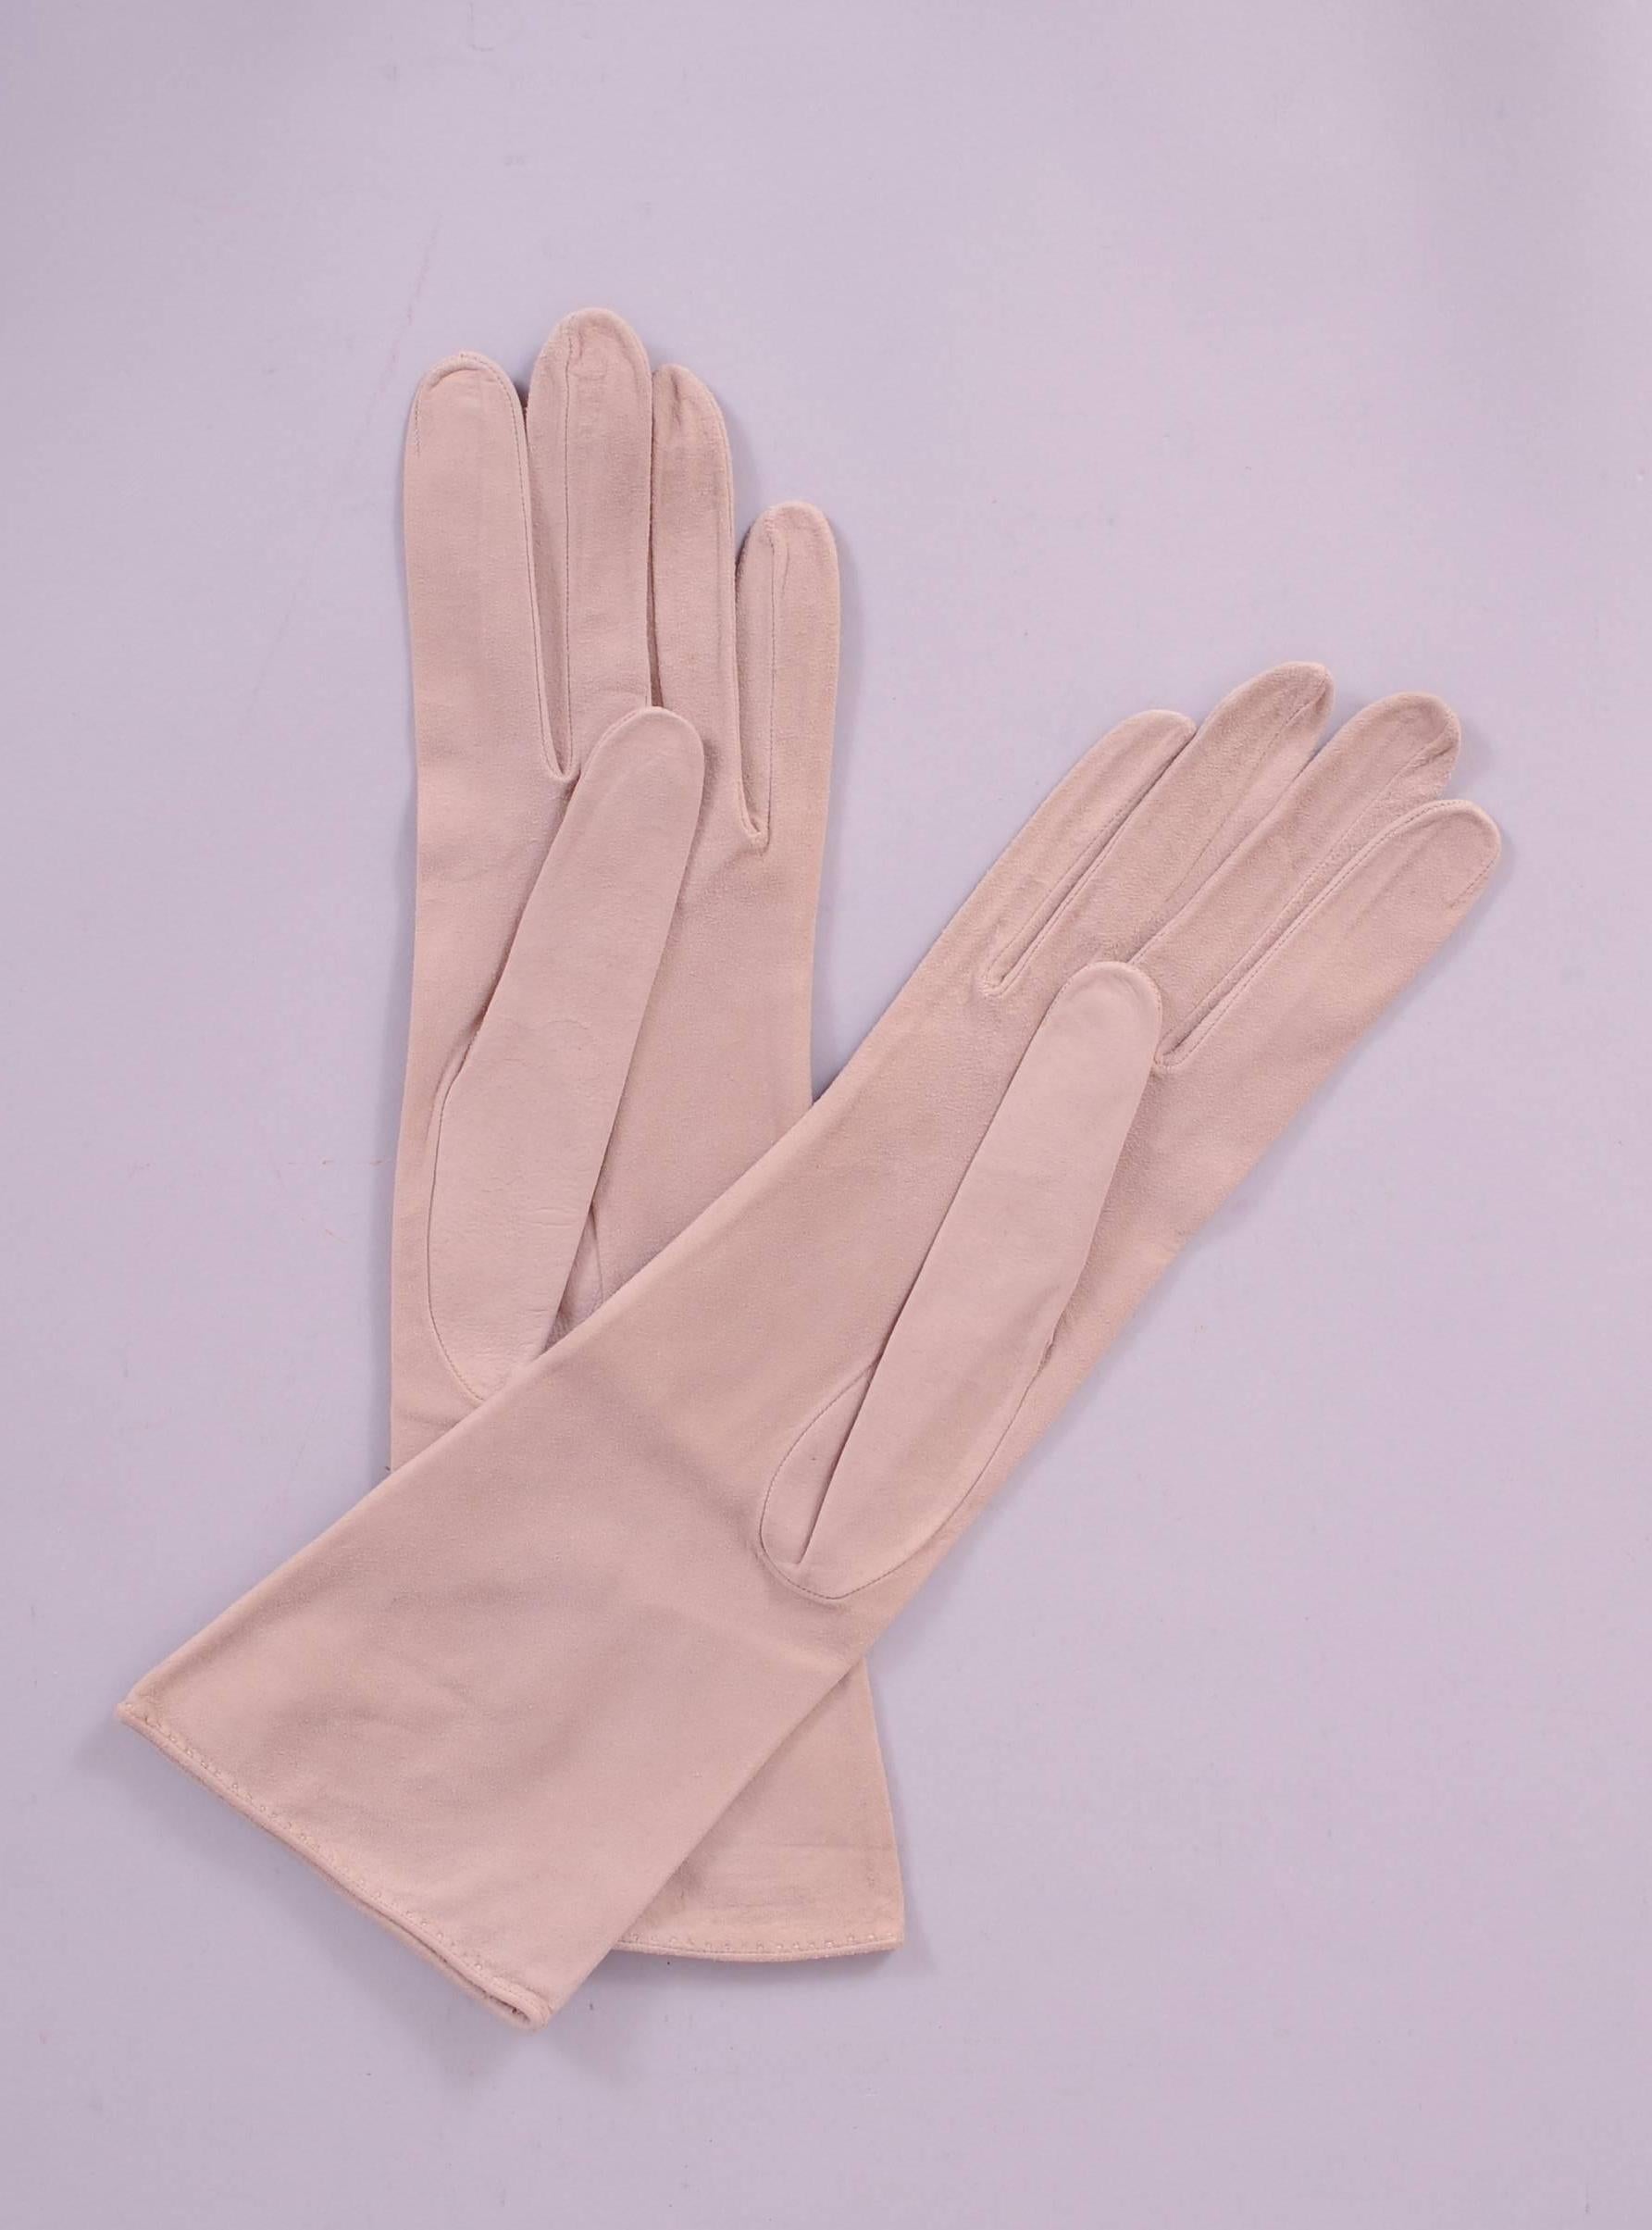 These pristine pale champagne beige suede gloves from Hermes have never been worn. They are marked a size 7 1/2 and they are in excellent condition.